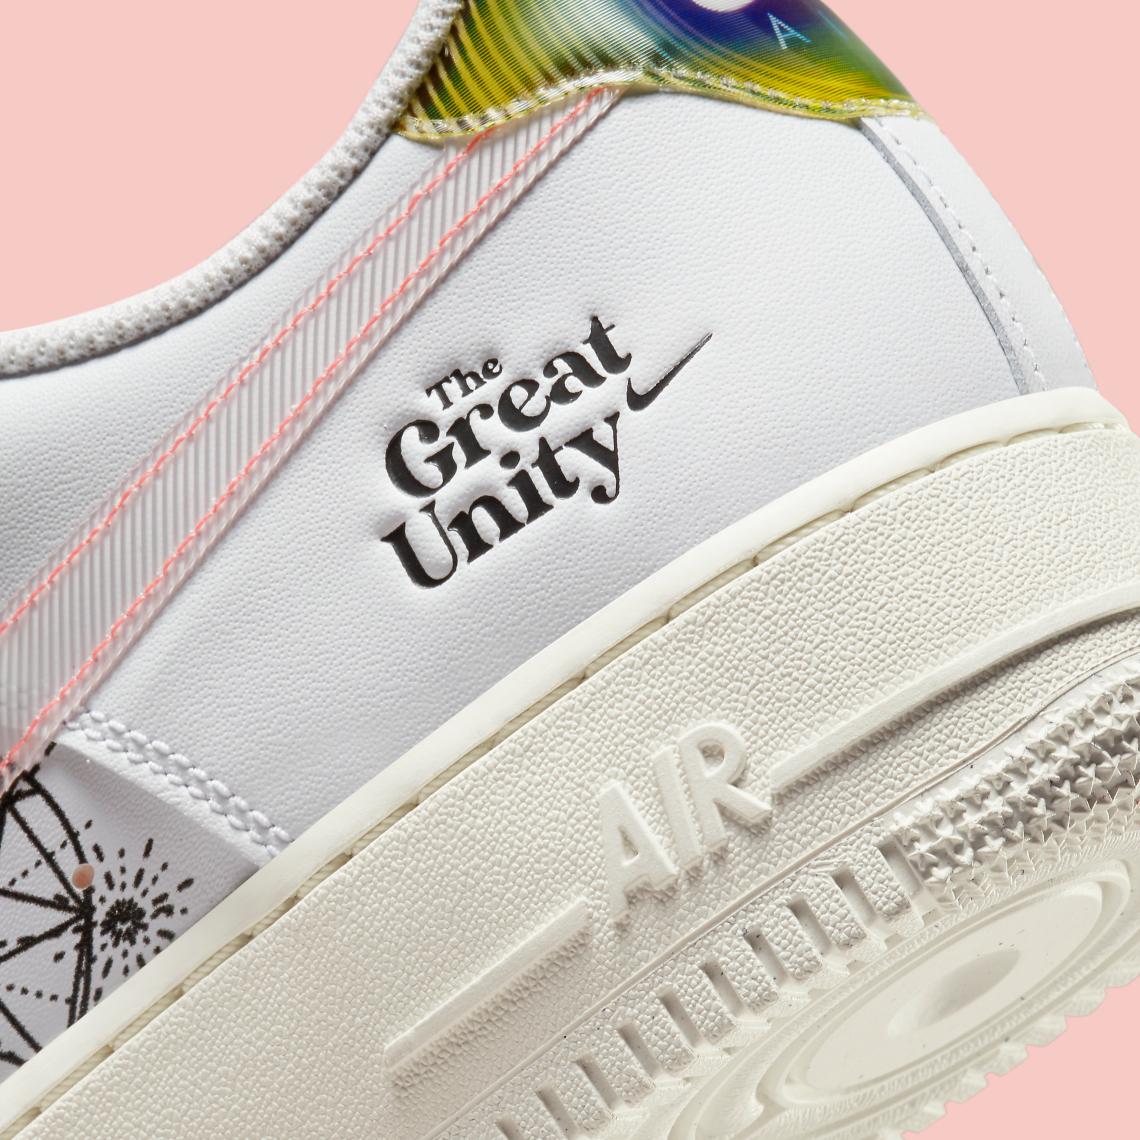 Buy > unity air force 1 > in stock